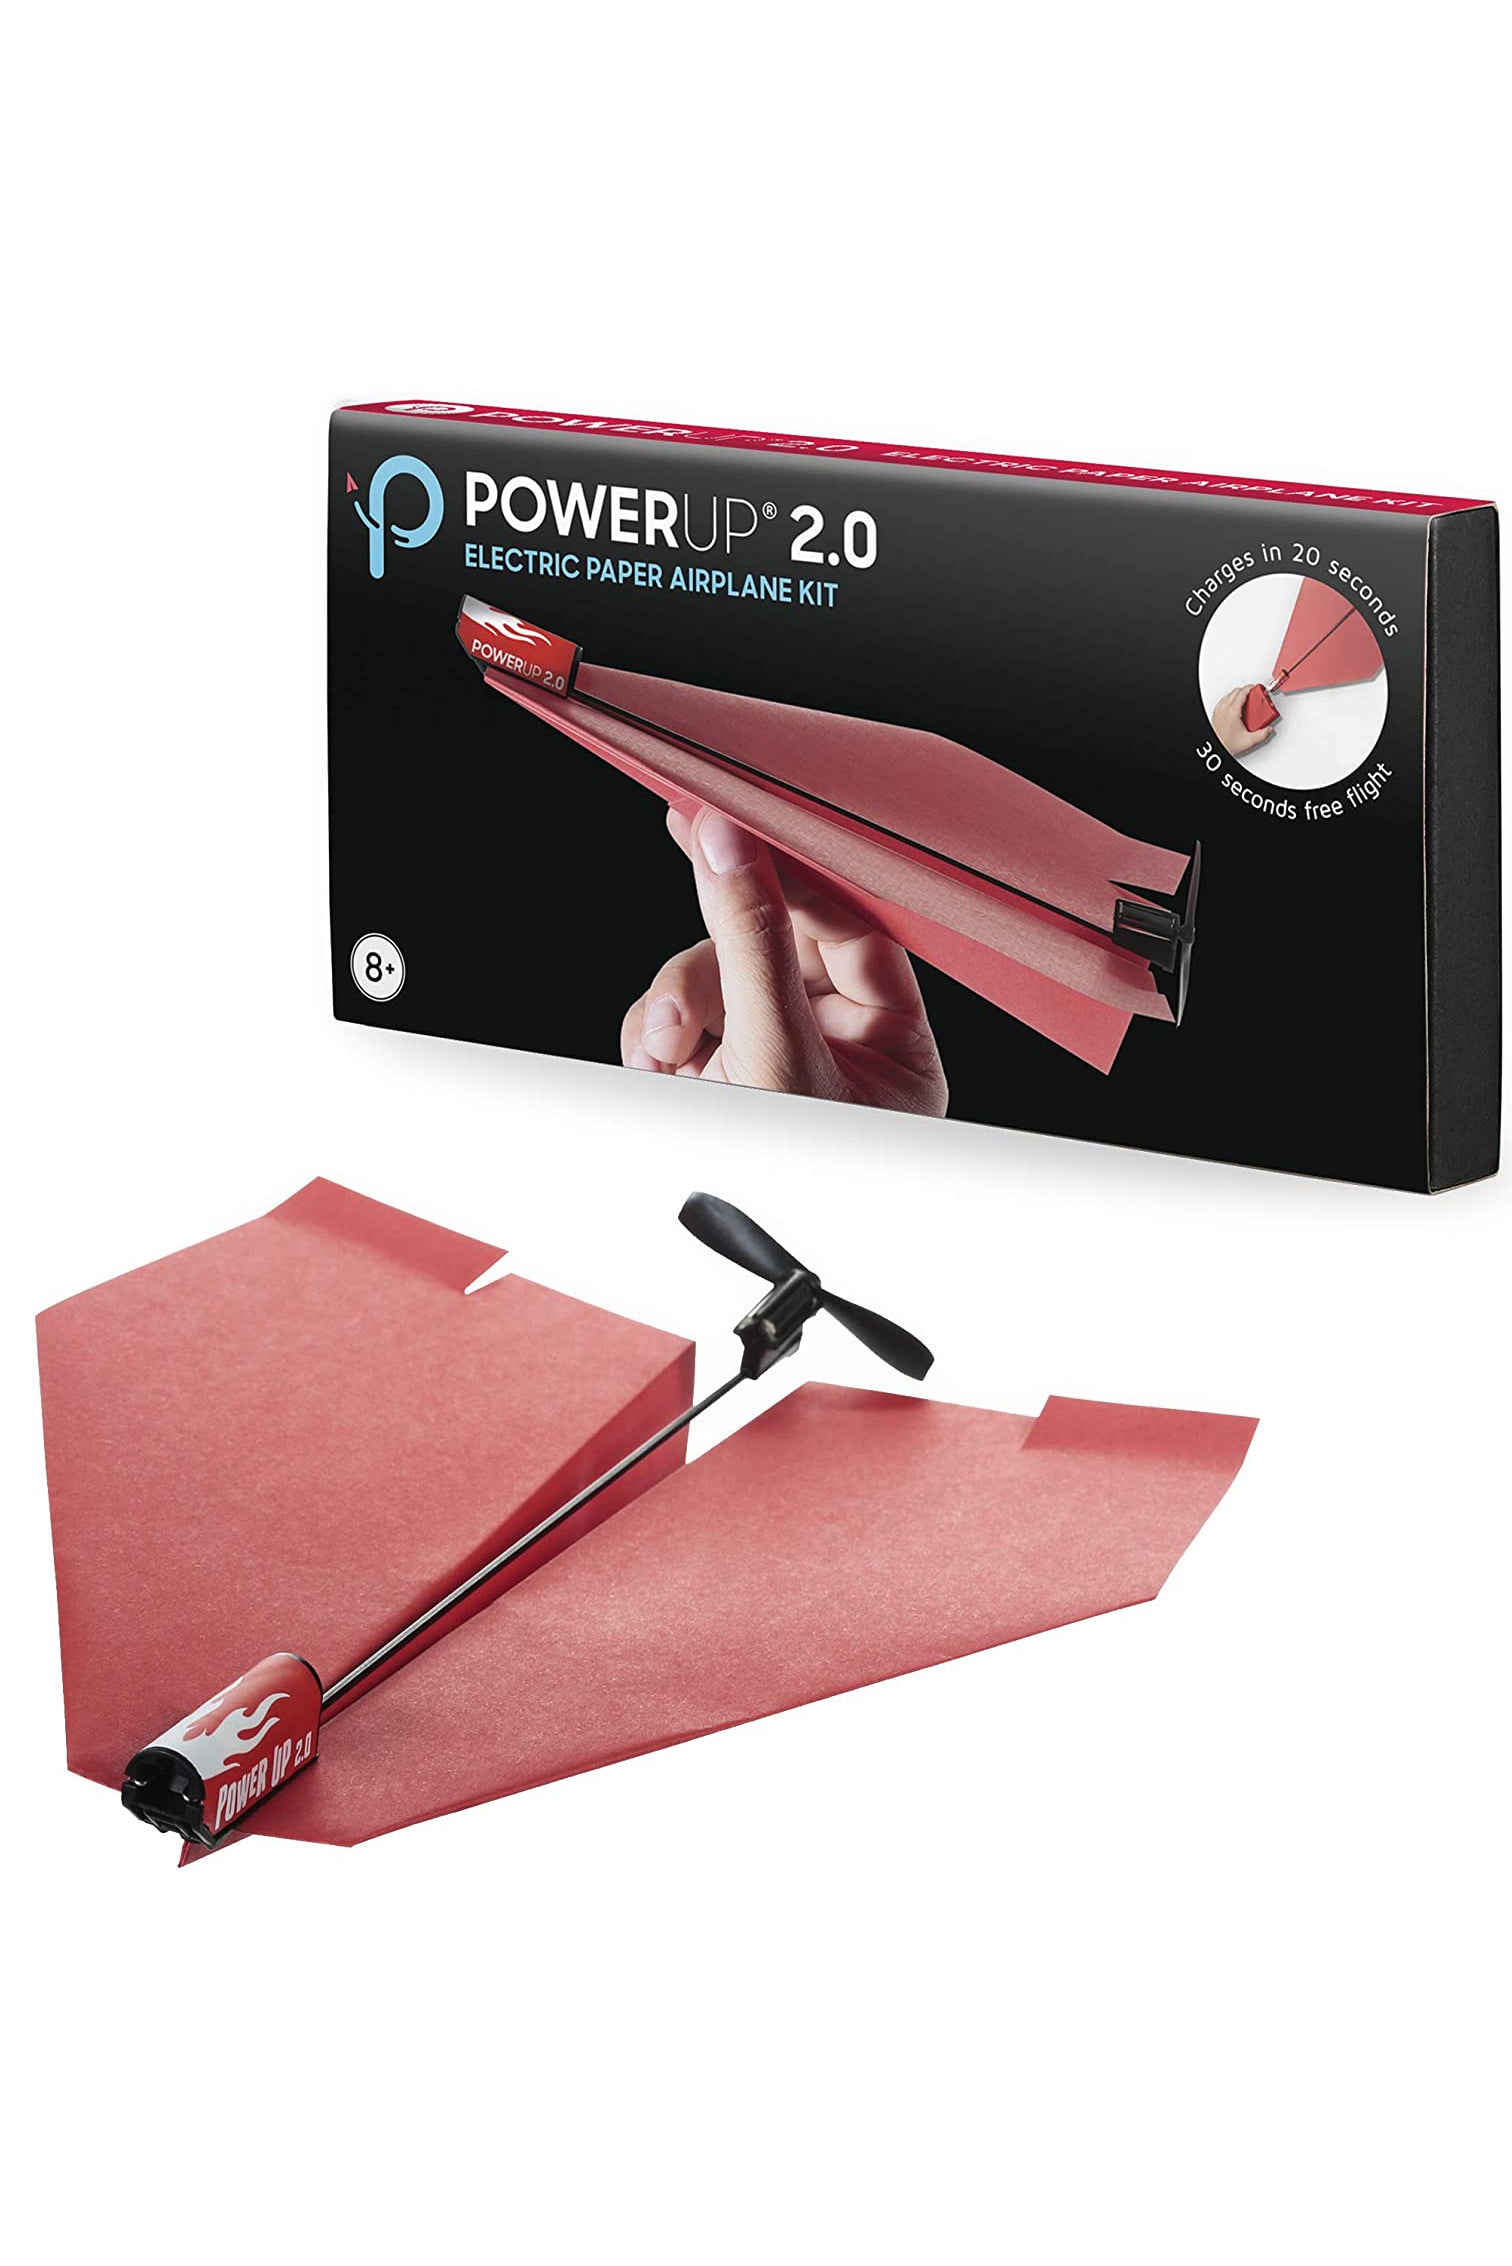 2.0 Electric Paper Airplane Kit